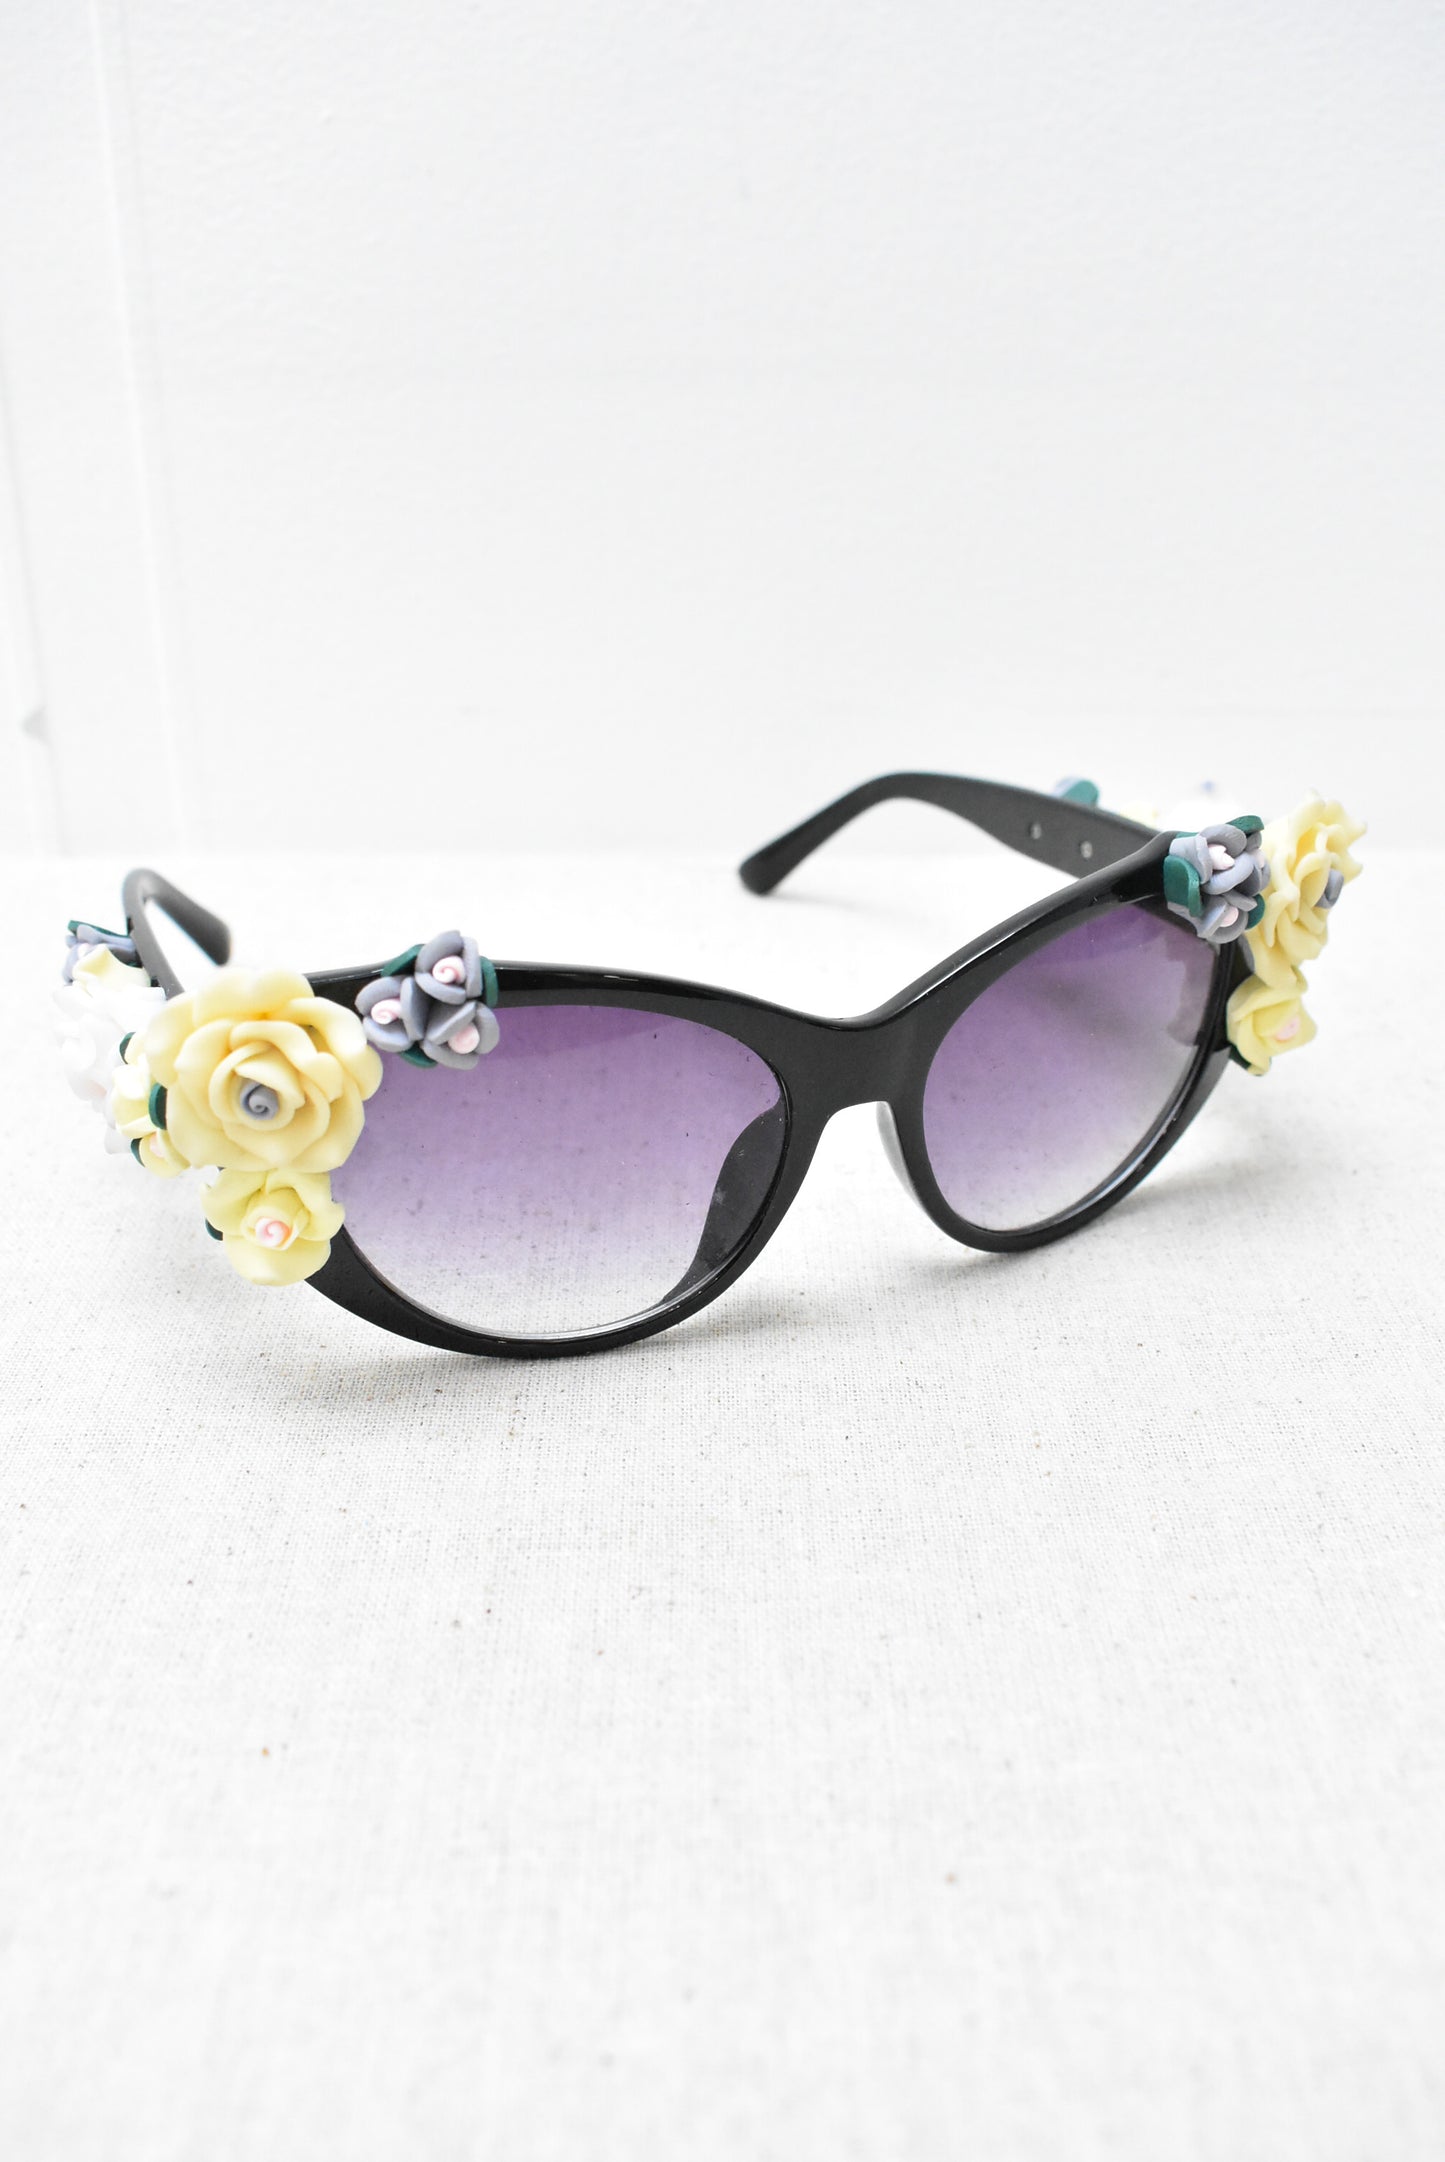 Funky black sunglasses with 3d flowers